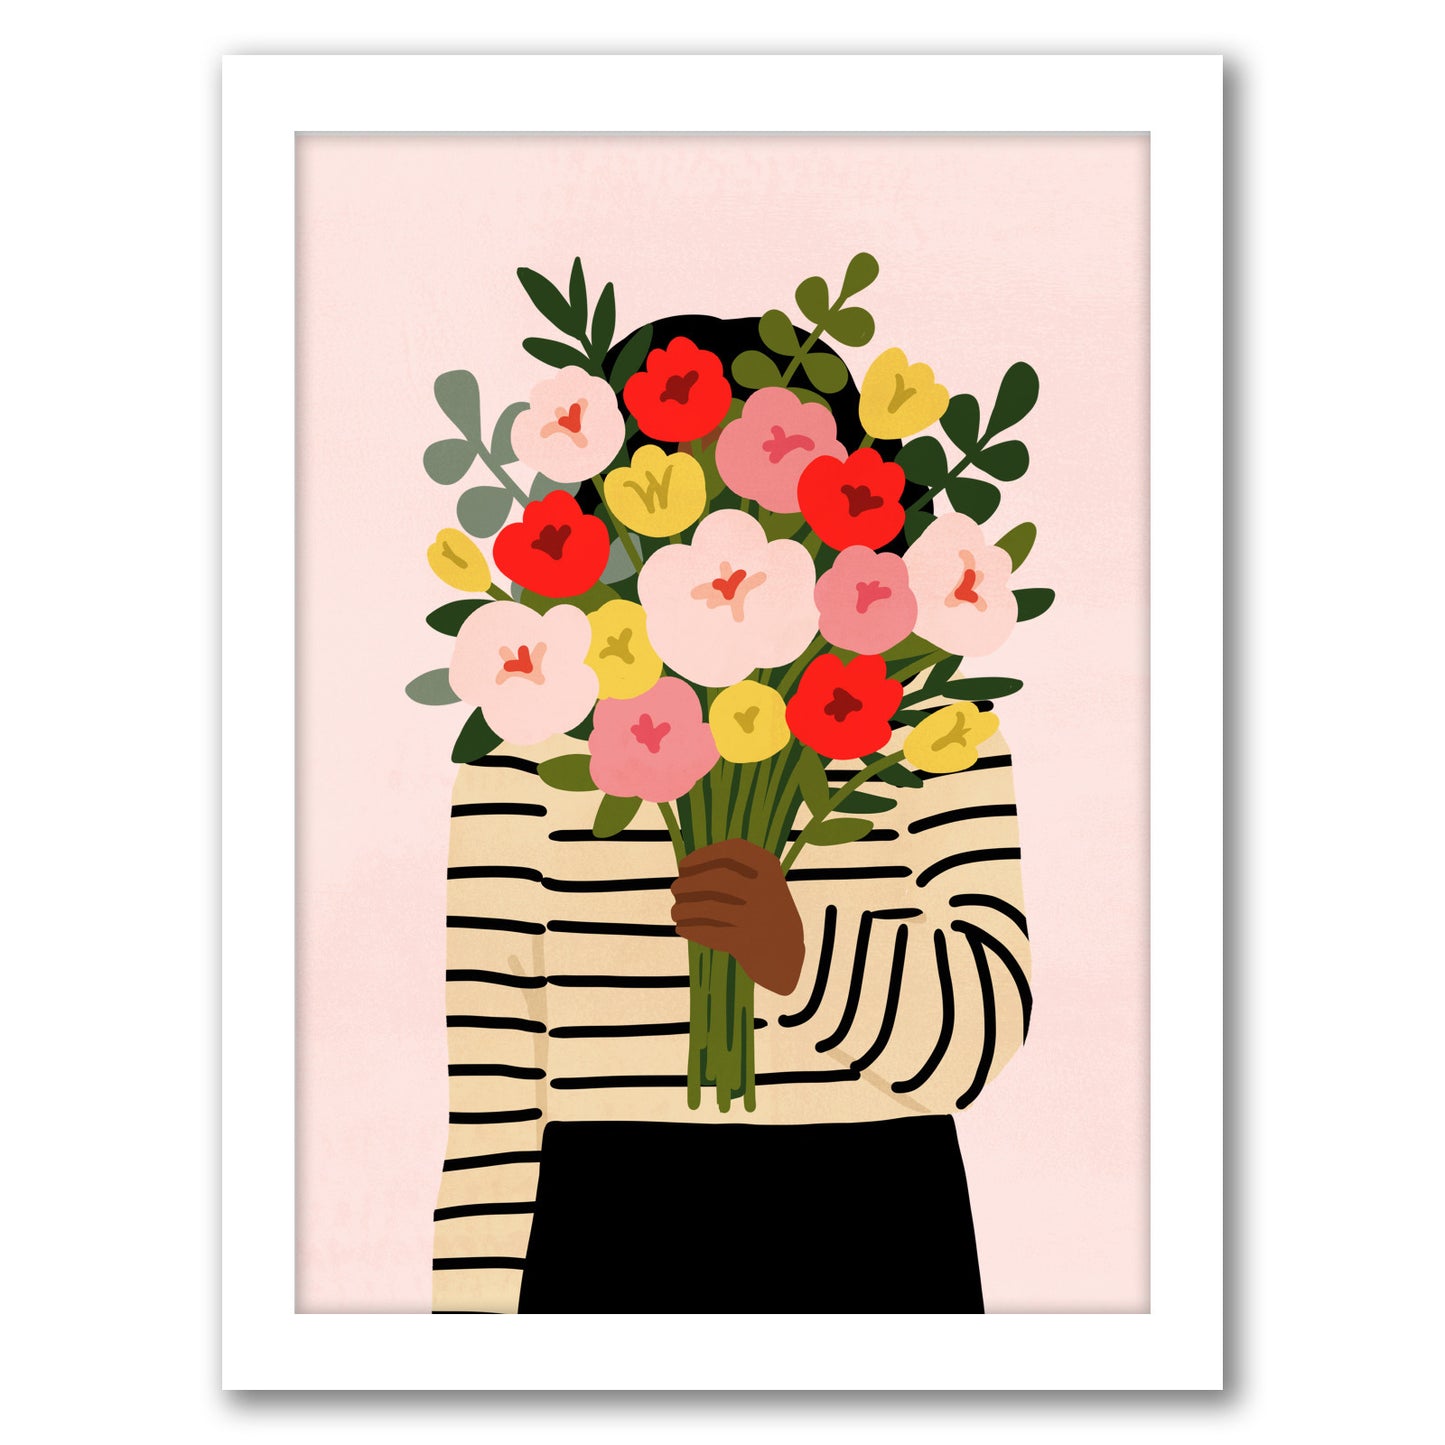 Darling Valentine I by Victoria Borges by World Art Group - Framed Print